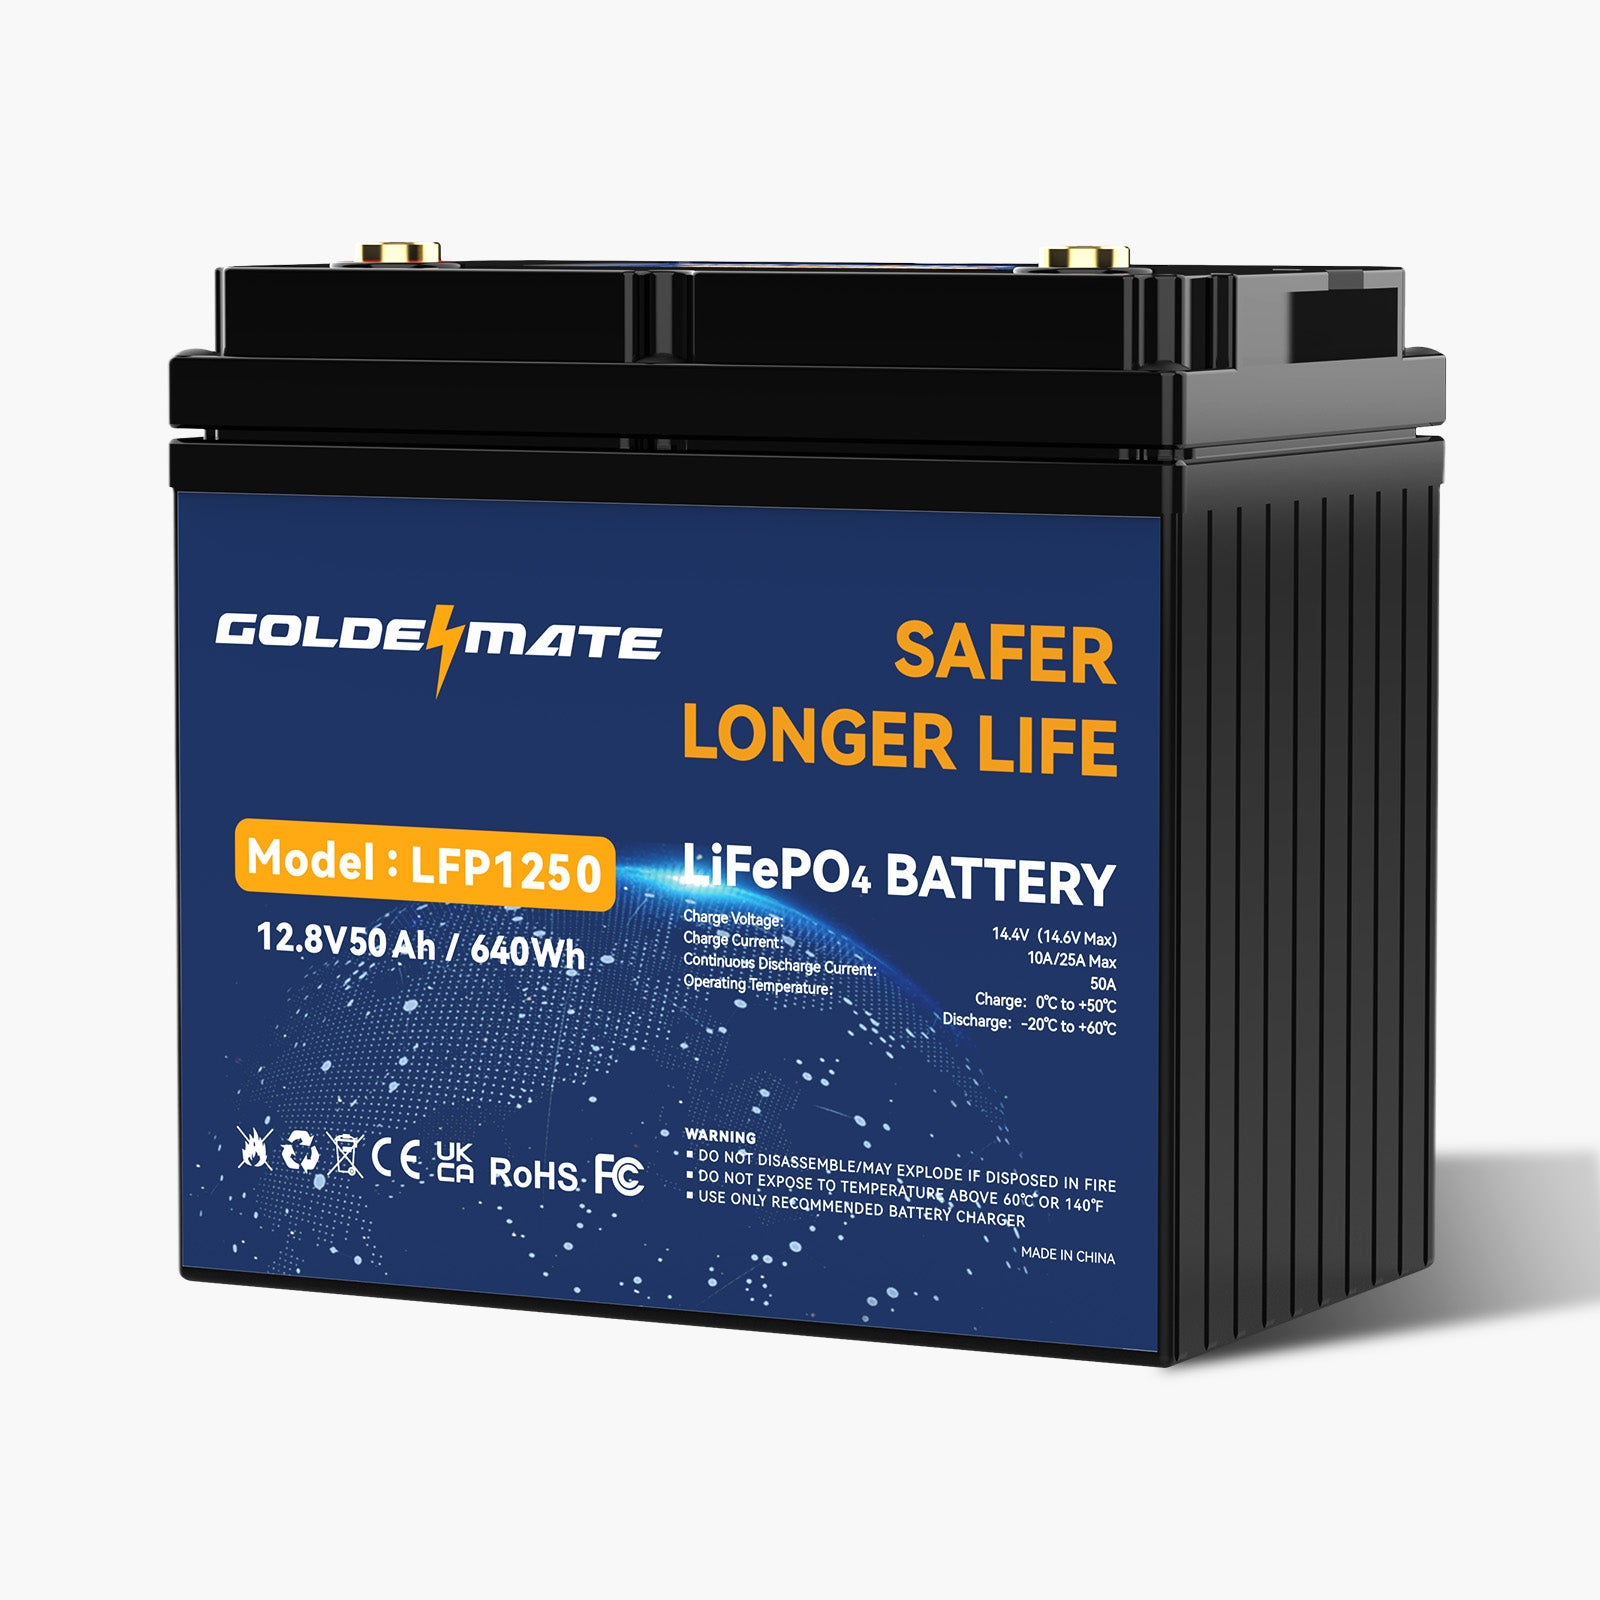 GoldenMate 12V 50Ah LiFePO4 Lithium Battery- 640Wh Energy, Marine, RV, Fish Finder Battery